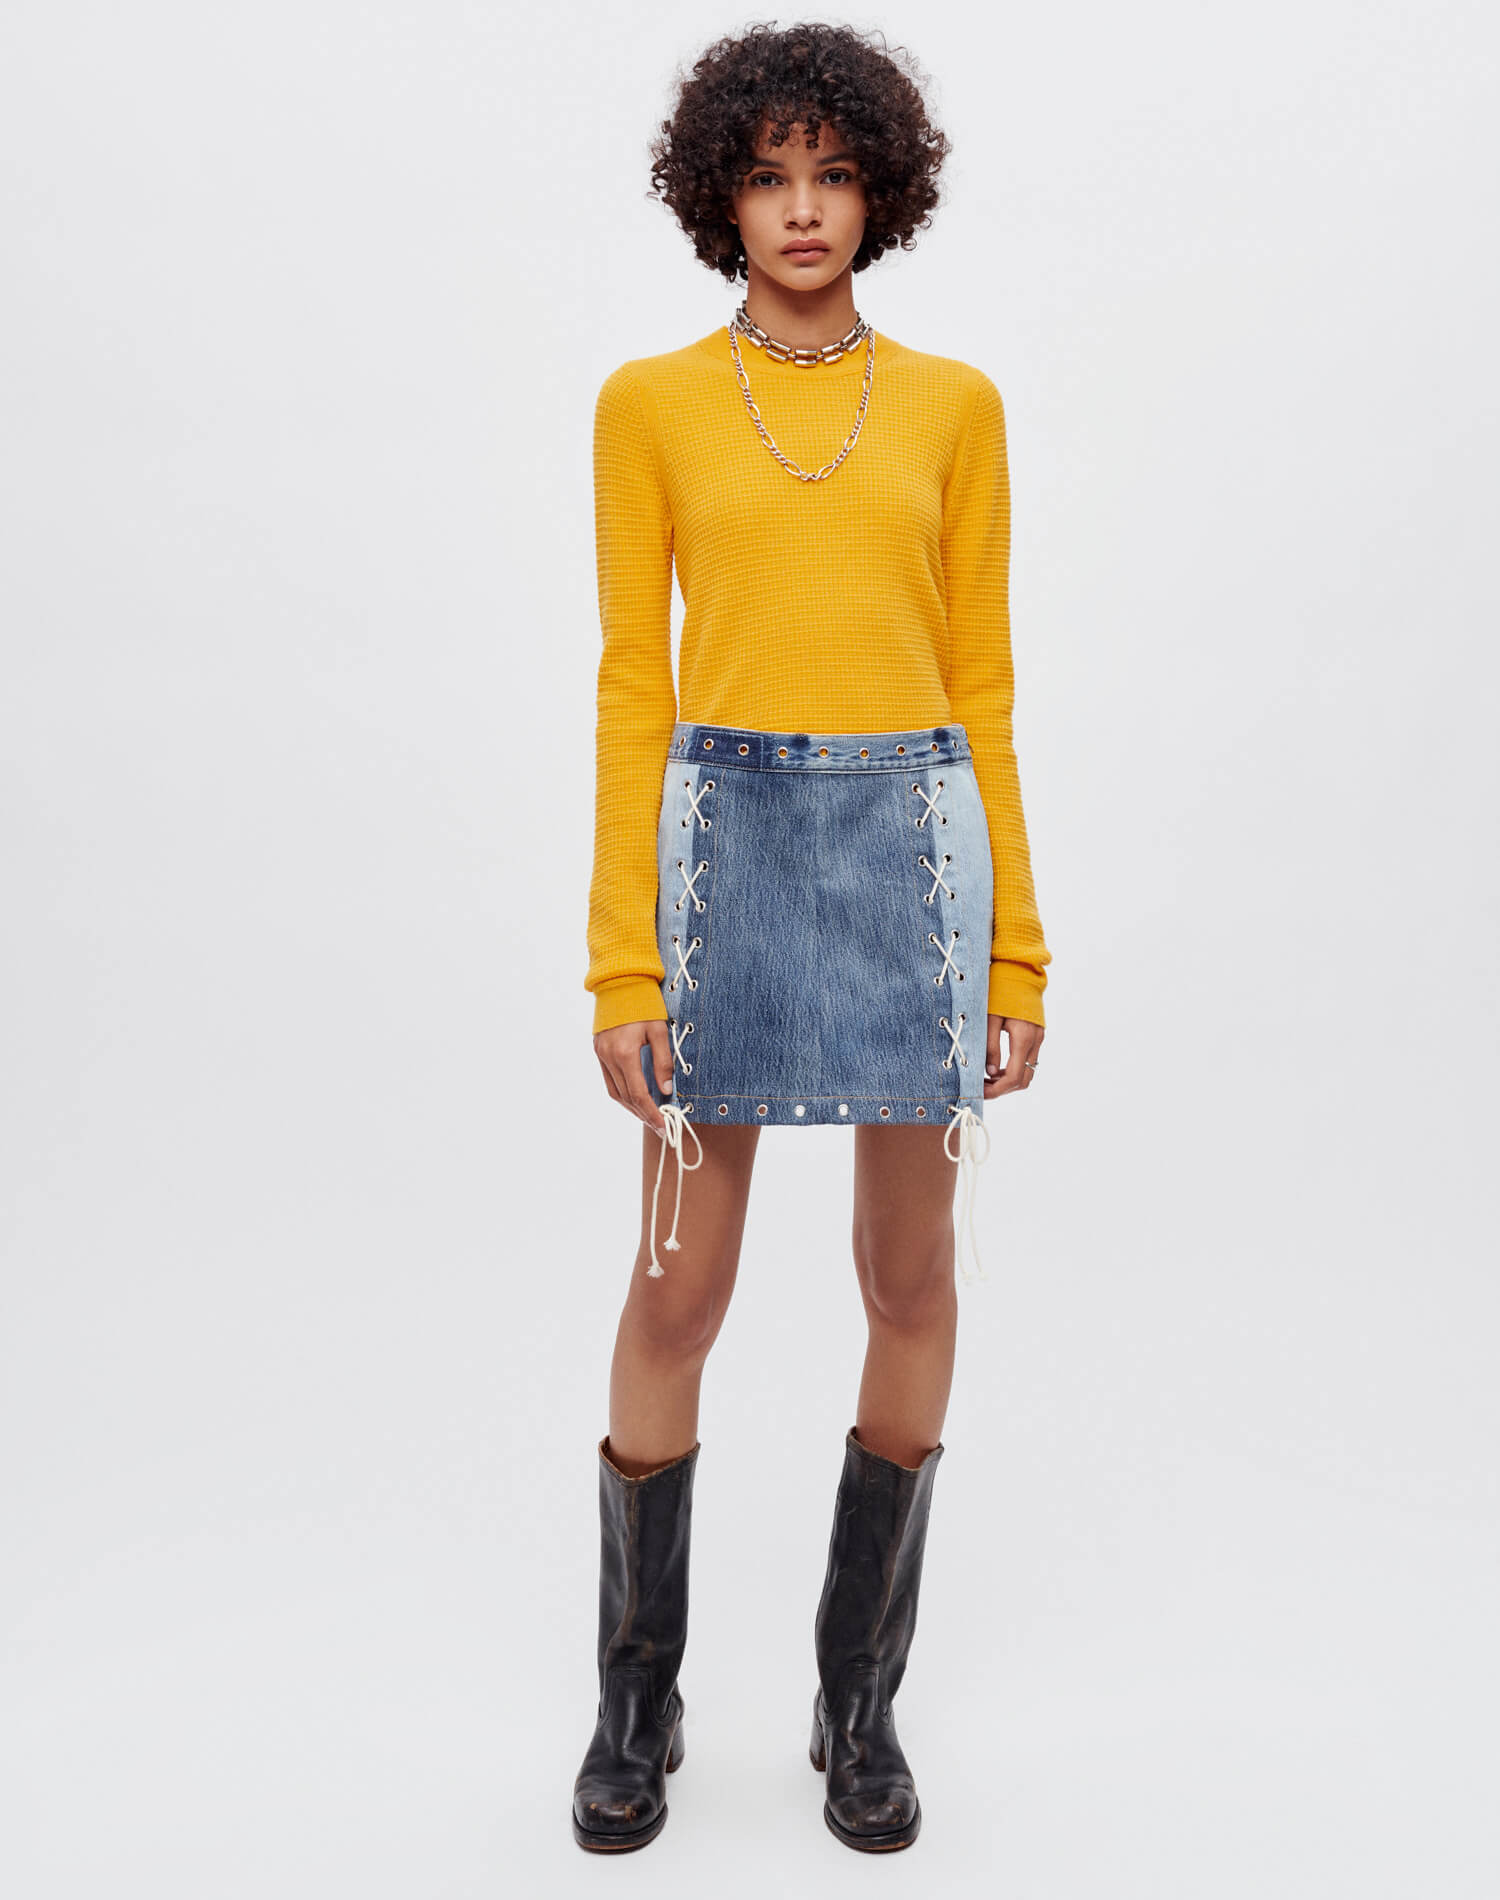 Waffle Slim Pullover - Clementine